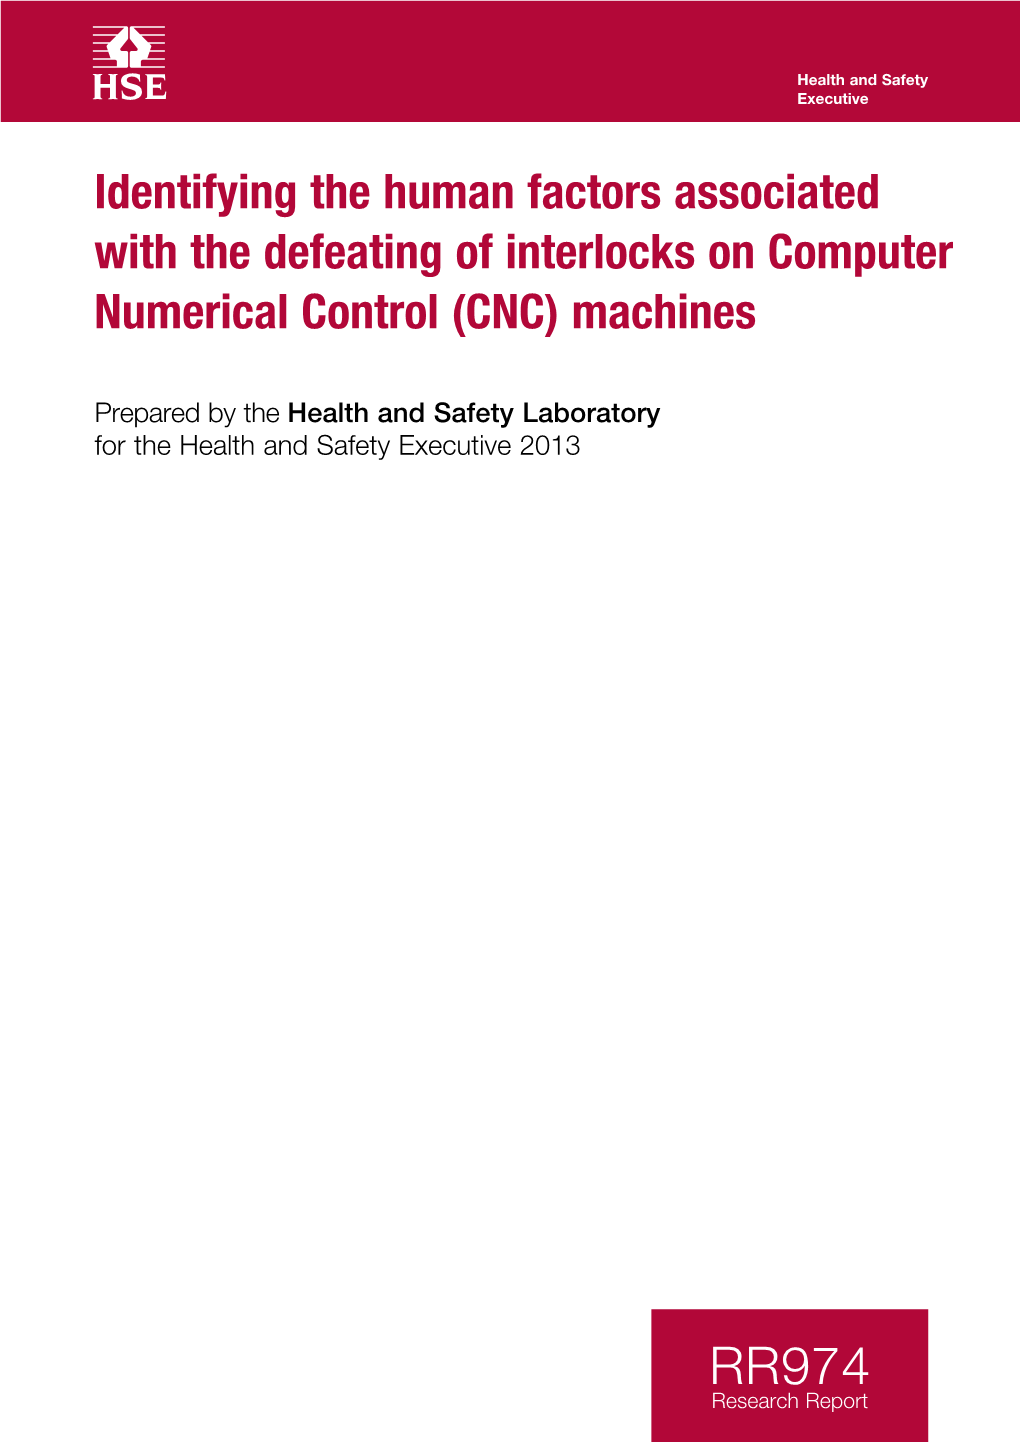 Identifying the Human Factors Associated with the Defeating of Interlocks on Computer Numerical Control (CNC) Machines